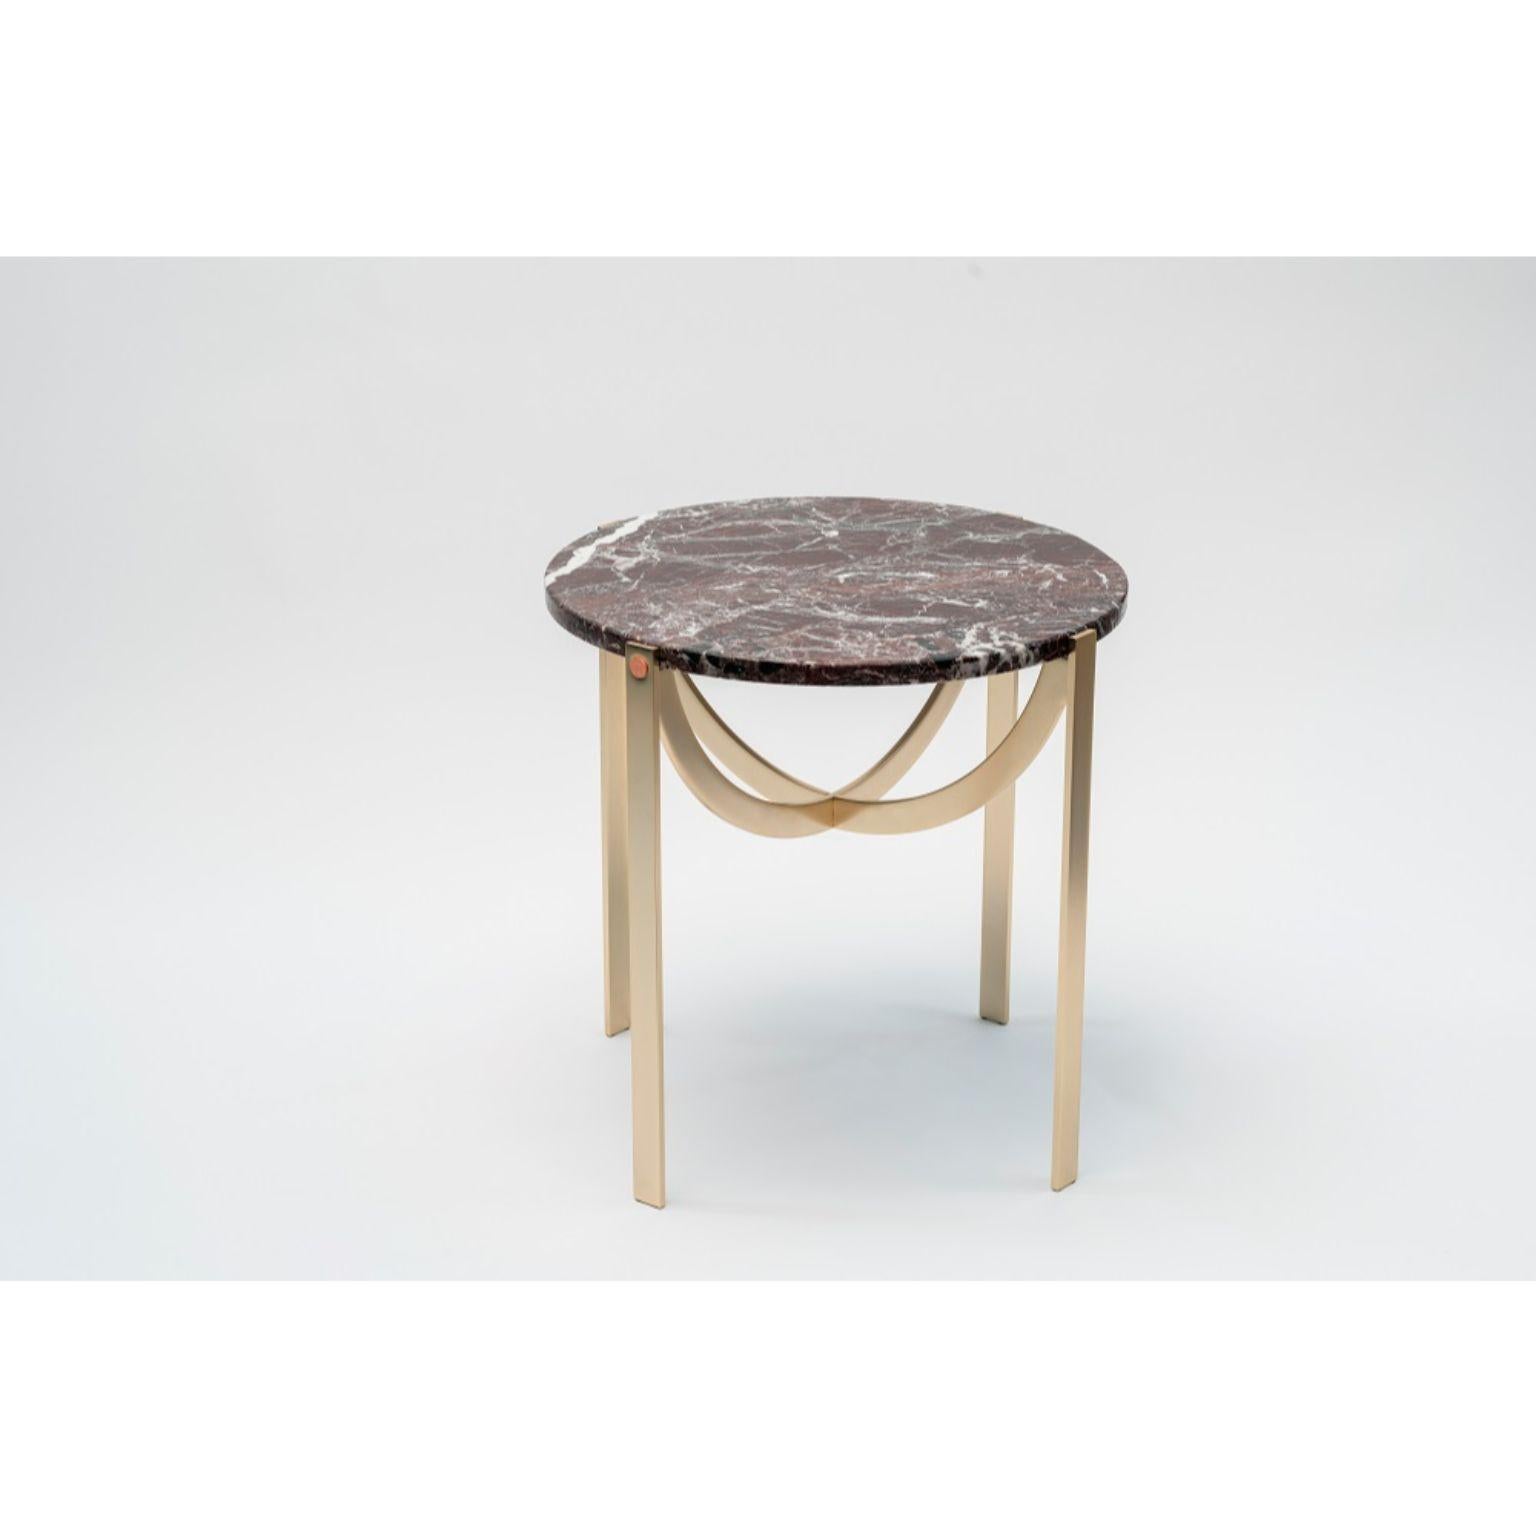 Medium Astra coffee table by Patrick Norguet
Materials: Marble and metal structure
Dimensions: Ø 81.6 x H 41.8 cm

The Astra family of coffee tables surprises by its sophisticated simplicity.
It was named as a tribute to those old instruments, which